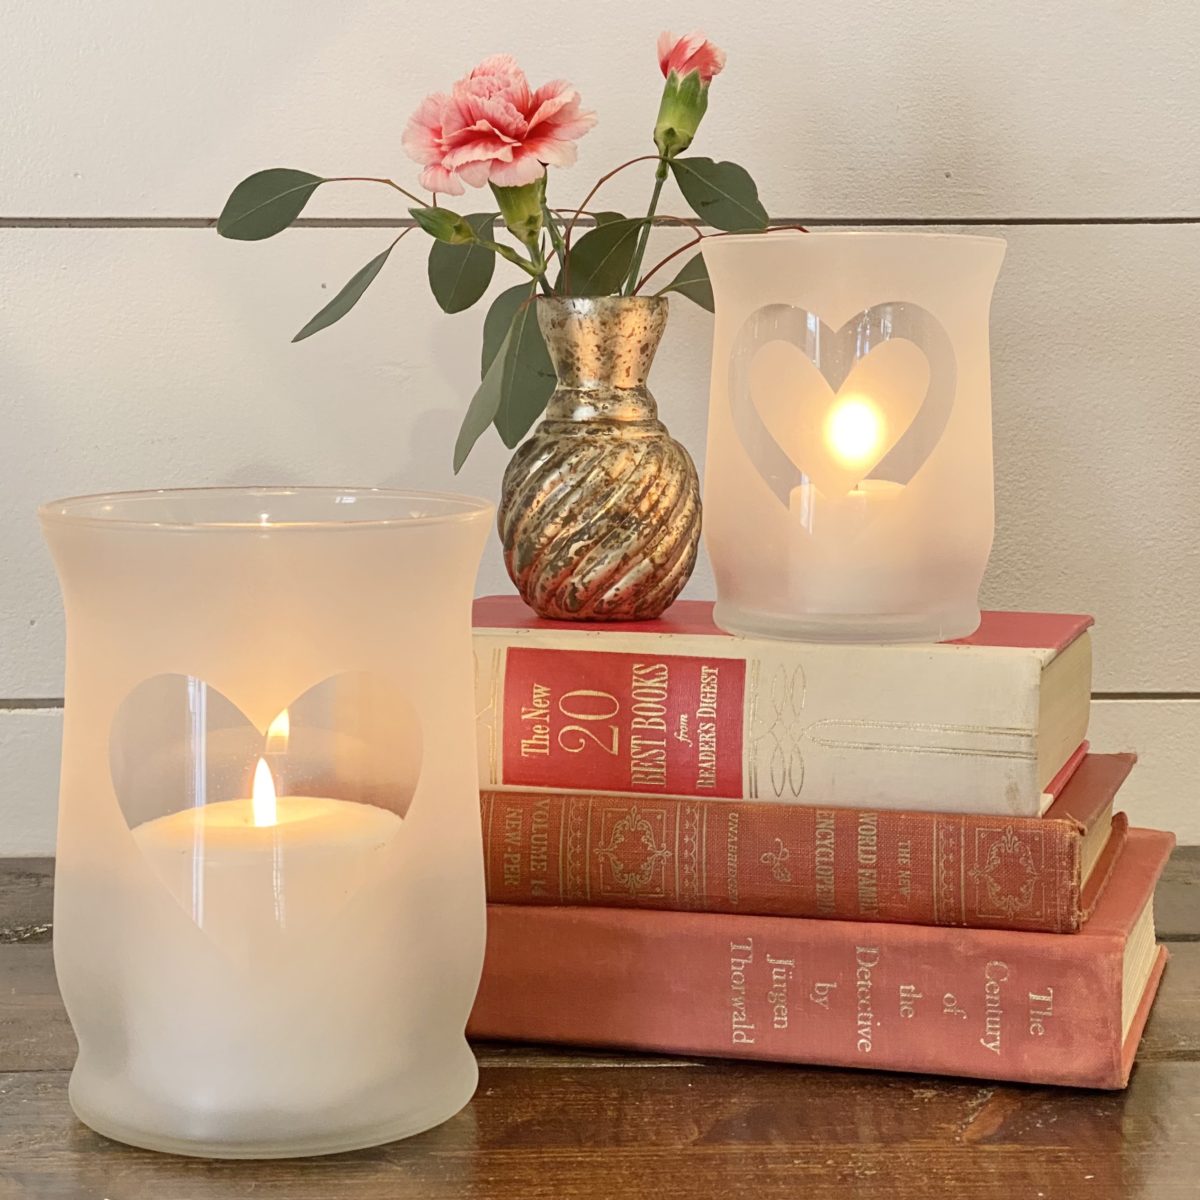 Frosted glass heart candle holders with candles lit in them styled with red, white, and pink books and a small vase with flowers.